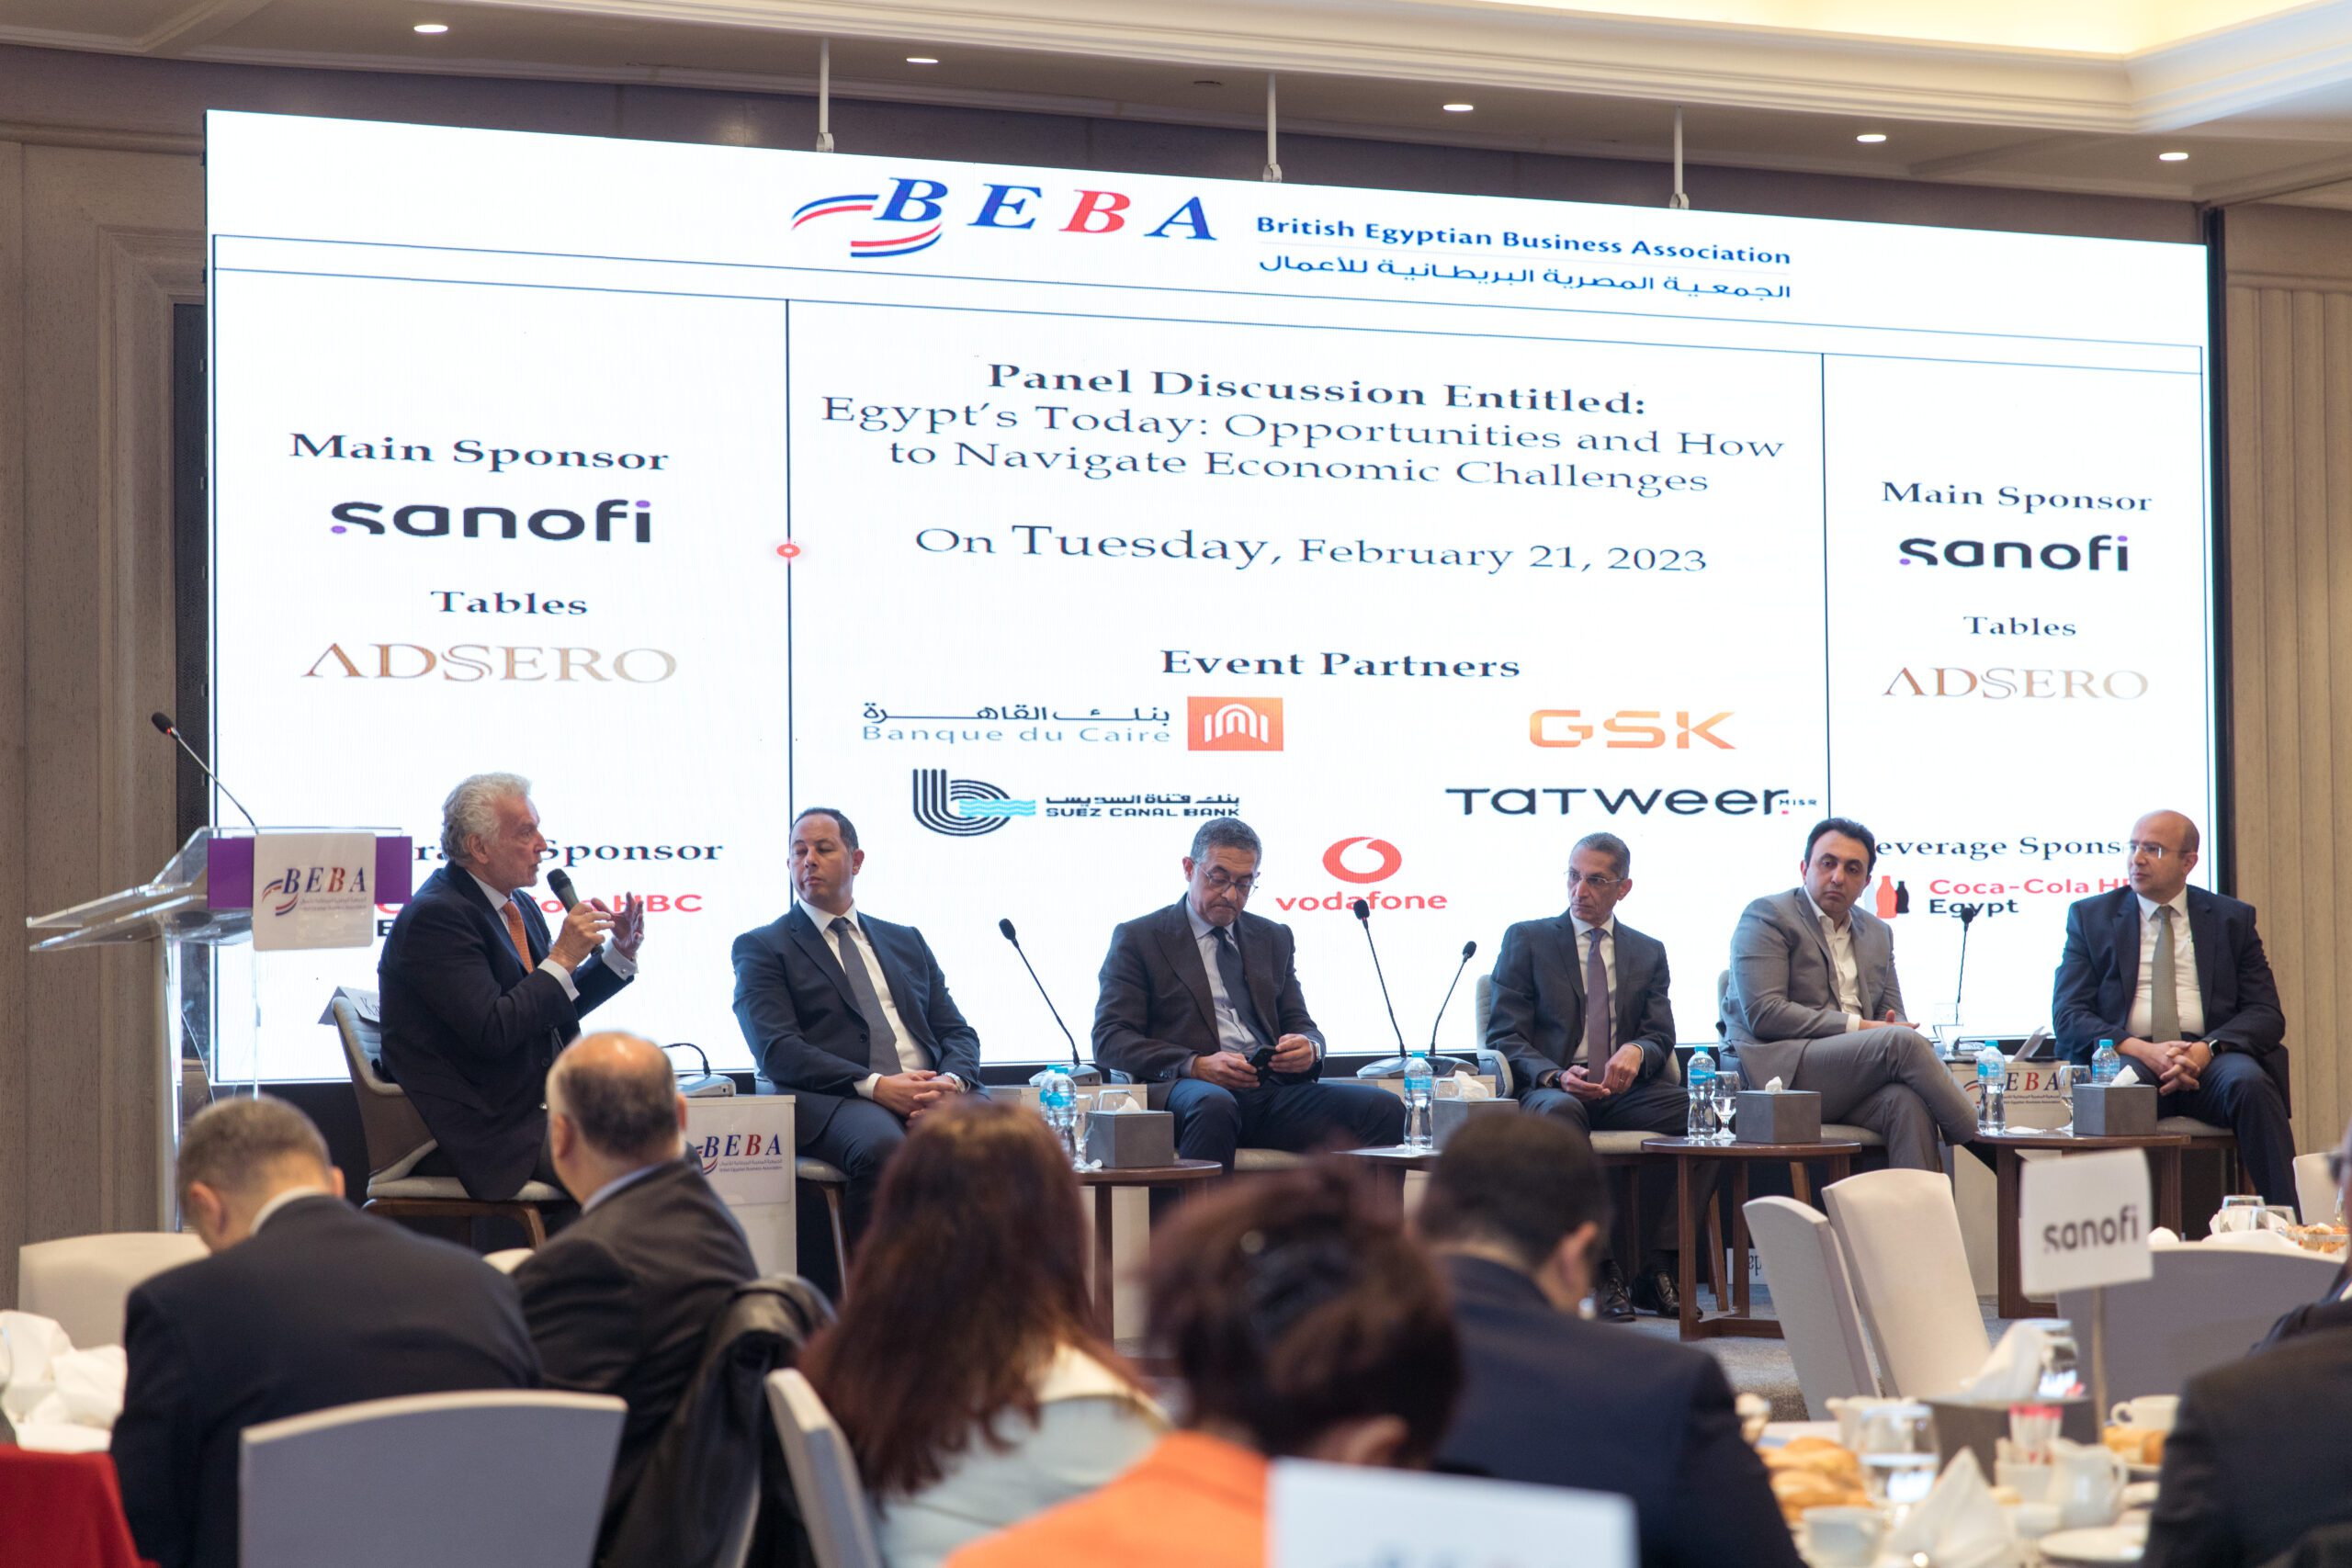 Panel Discussion Entitled: Egypt’s Today: Opportunities and How to Navigate Economic Challenges